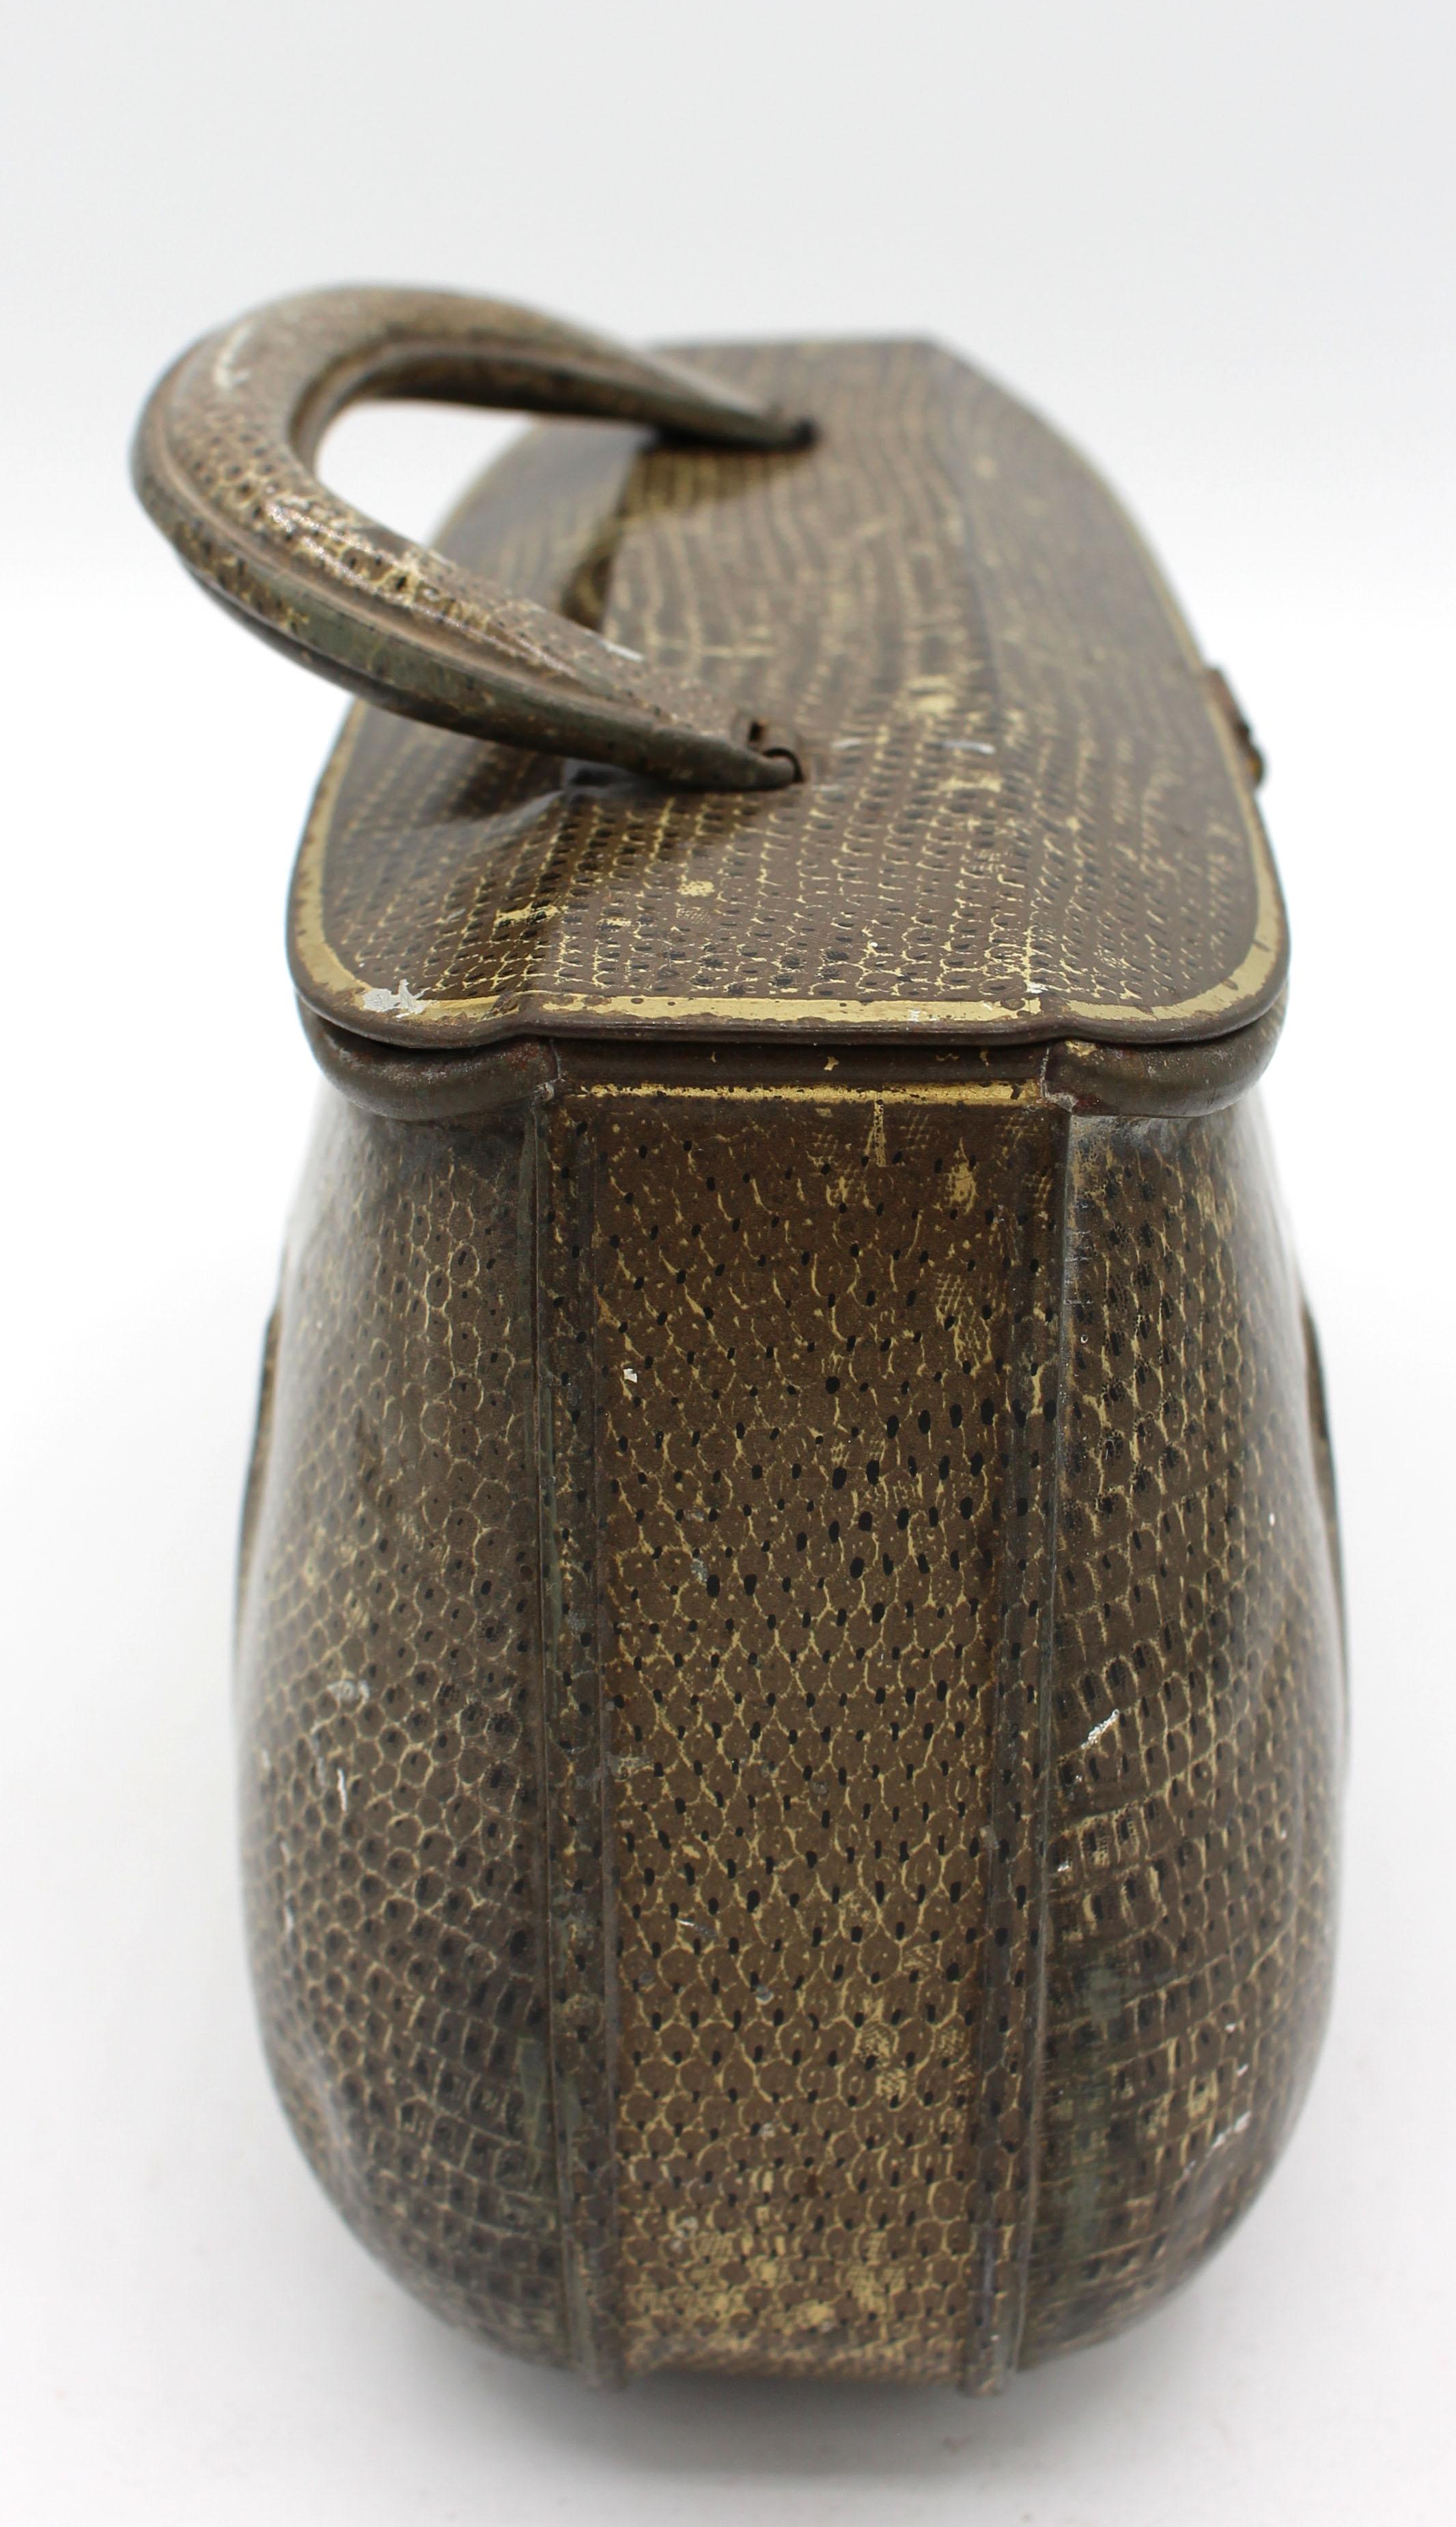 A satchel purse form biscuit tin box by Huntley & Palmers, early 20th century, English. Faux snakeskin decoration with elegant details. Registration No. 48391L, 1908. All parts in good order. Wear to surfaces is commensurate with age & use;